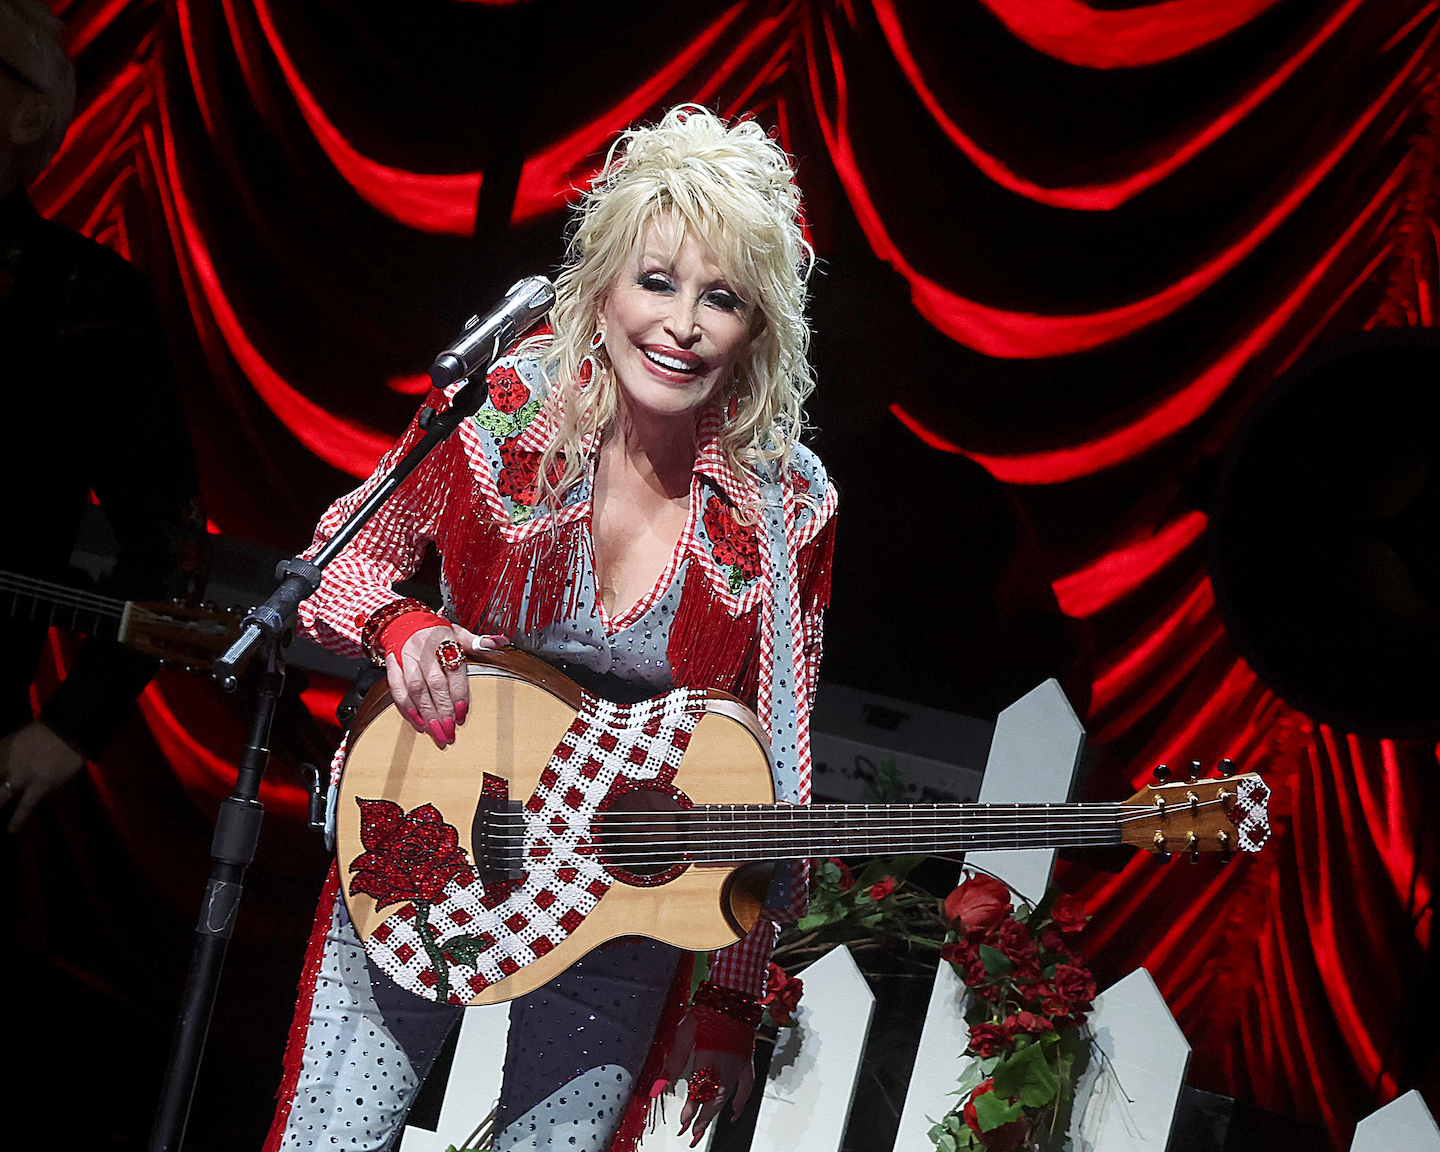 Dolly Parton performs on stage at ACL Live during Blockchain Creative Labs’ Dollyverse event